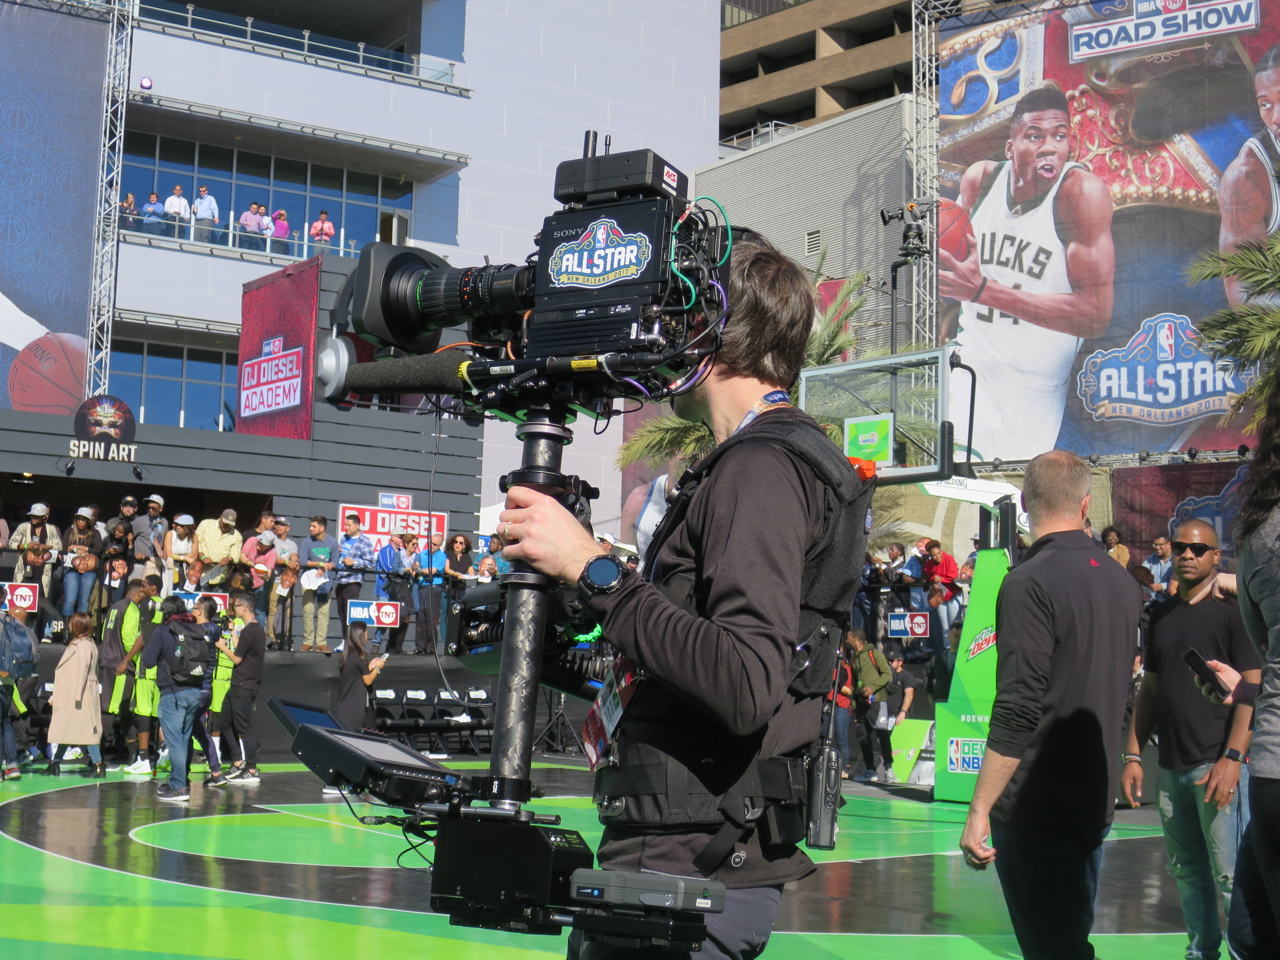 One of the Steadicams covering the Dew NBA3X final yesterday.